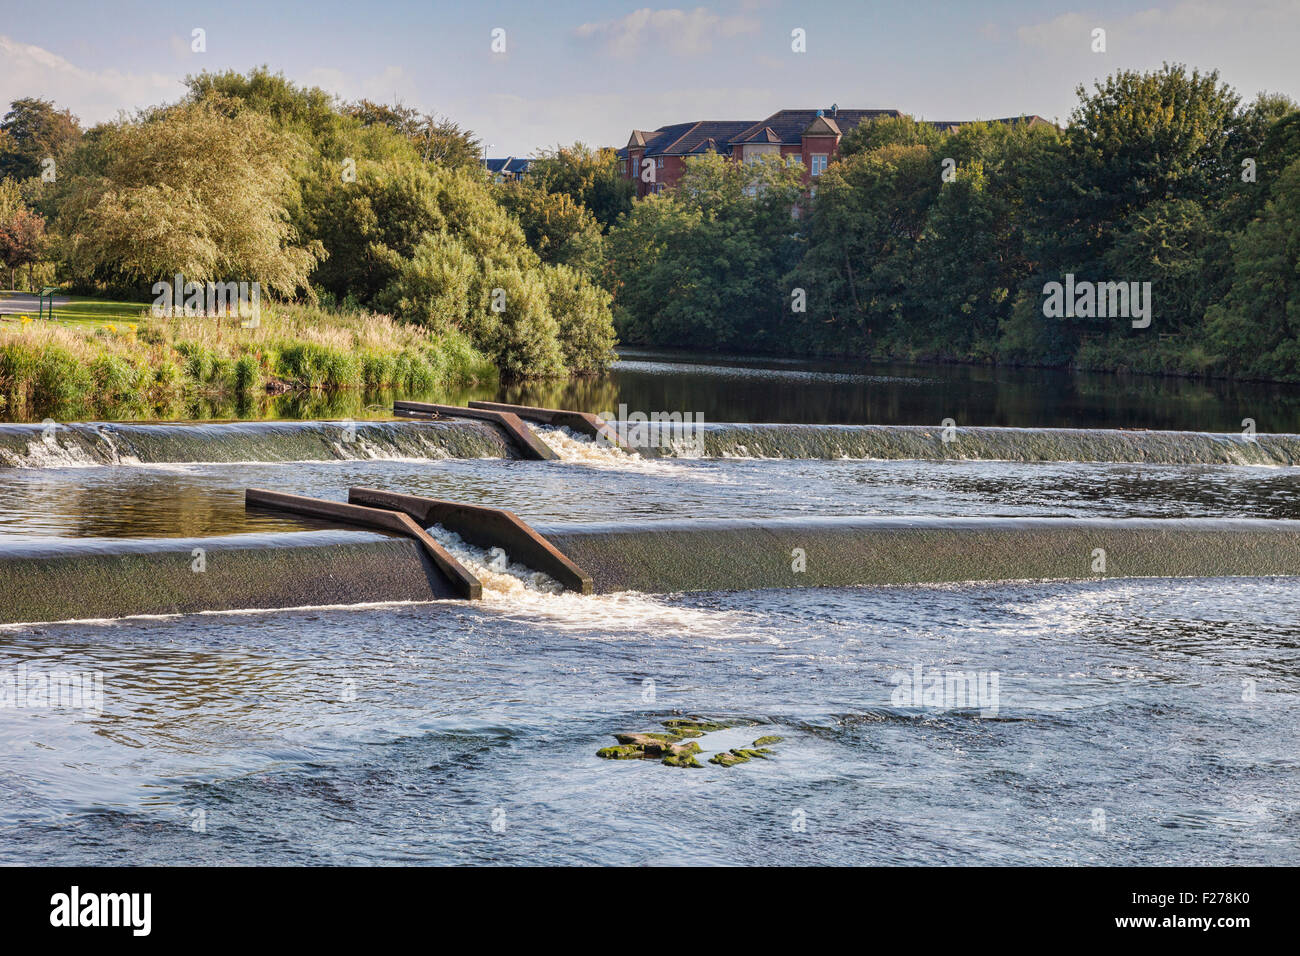 Salmon ladder on the weir on the River at Ayr, South Ayrshire, Scotland. Stock Photo